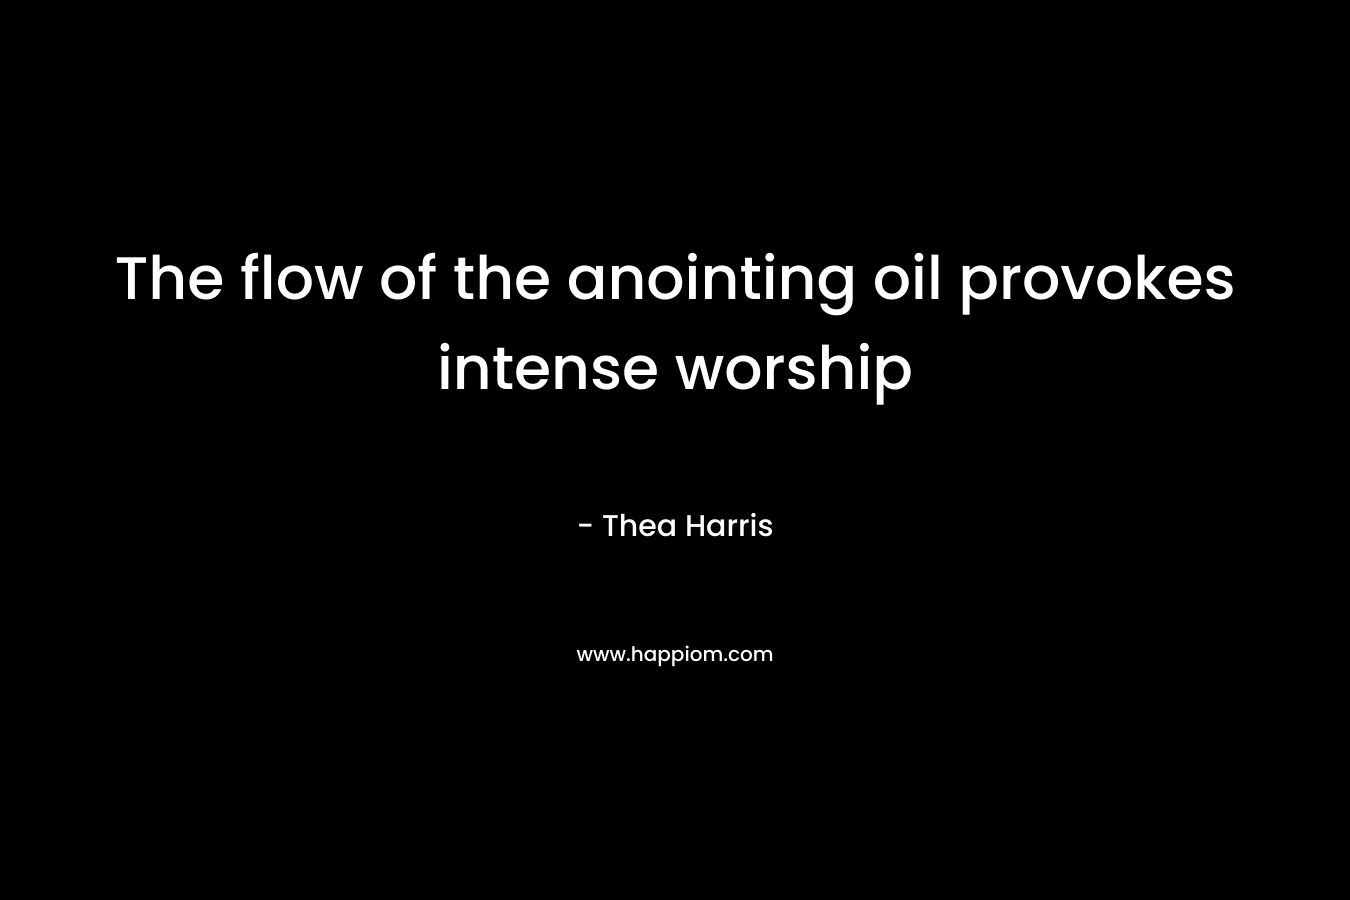 The flow of the anointing oil provokes intense worship – Thea Harris